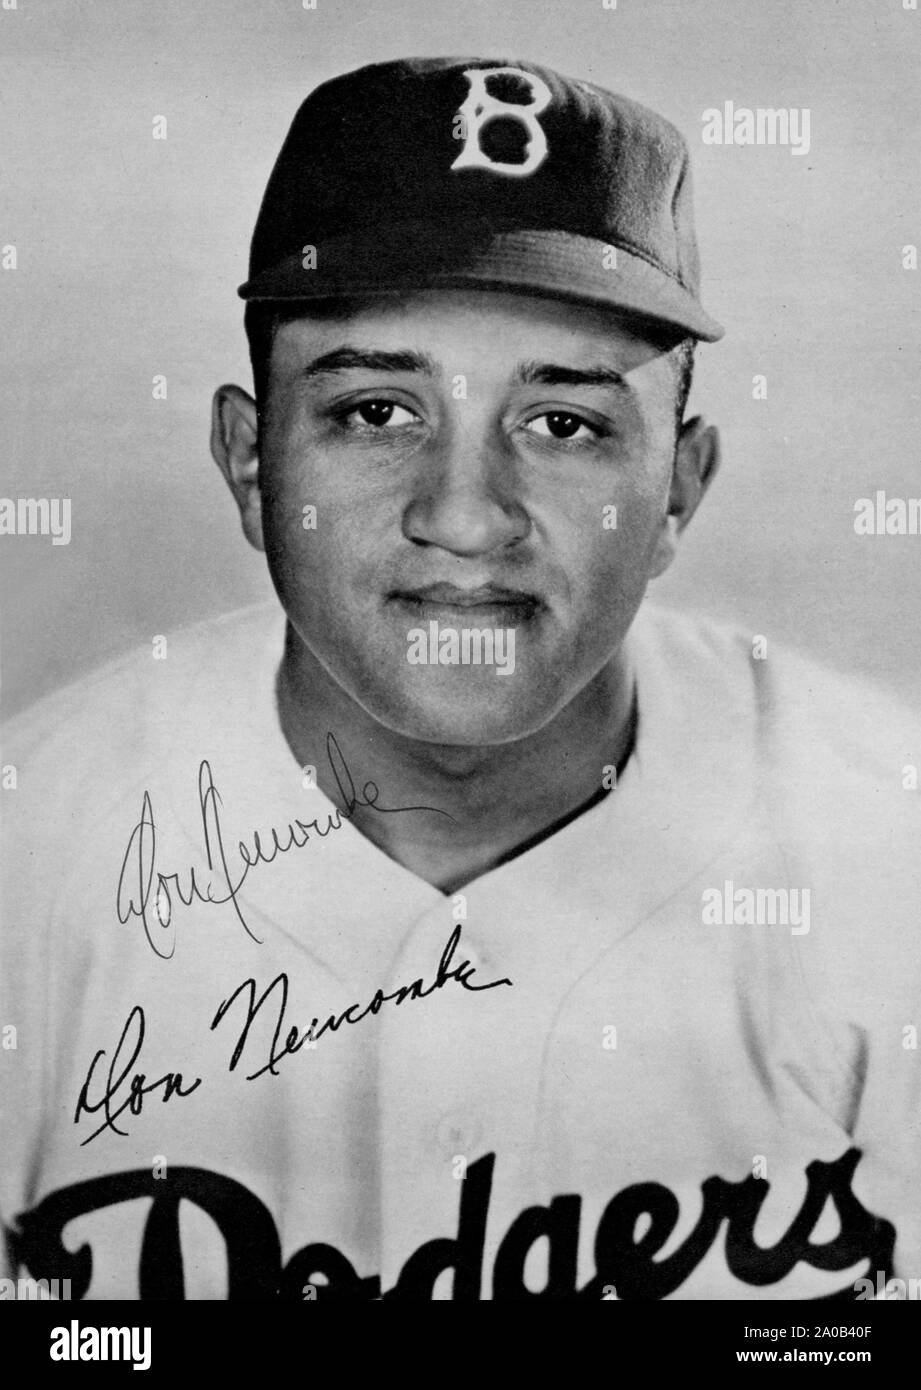 Vintage photograph of baseball player Don Newcombe who pitched with the Brooklyn Dodgers in the 1940s and 50s. . Stock Photo